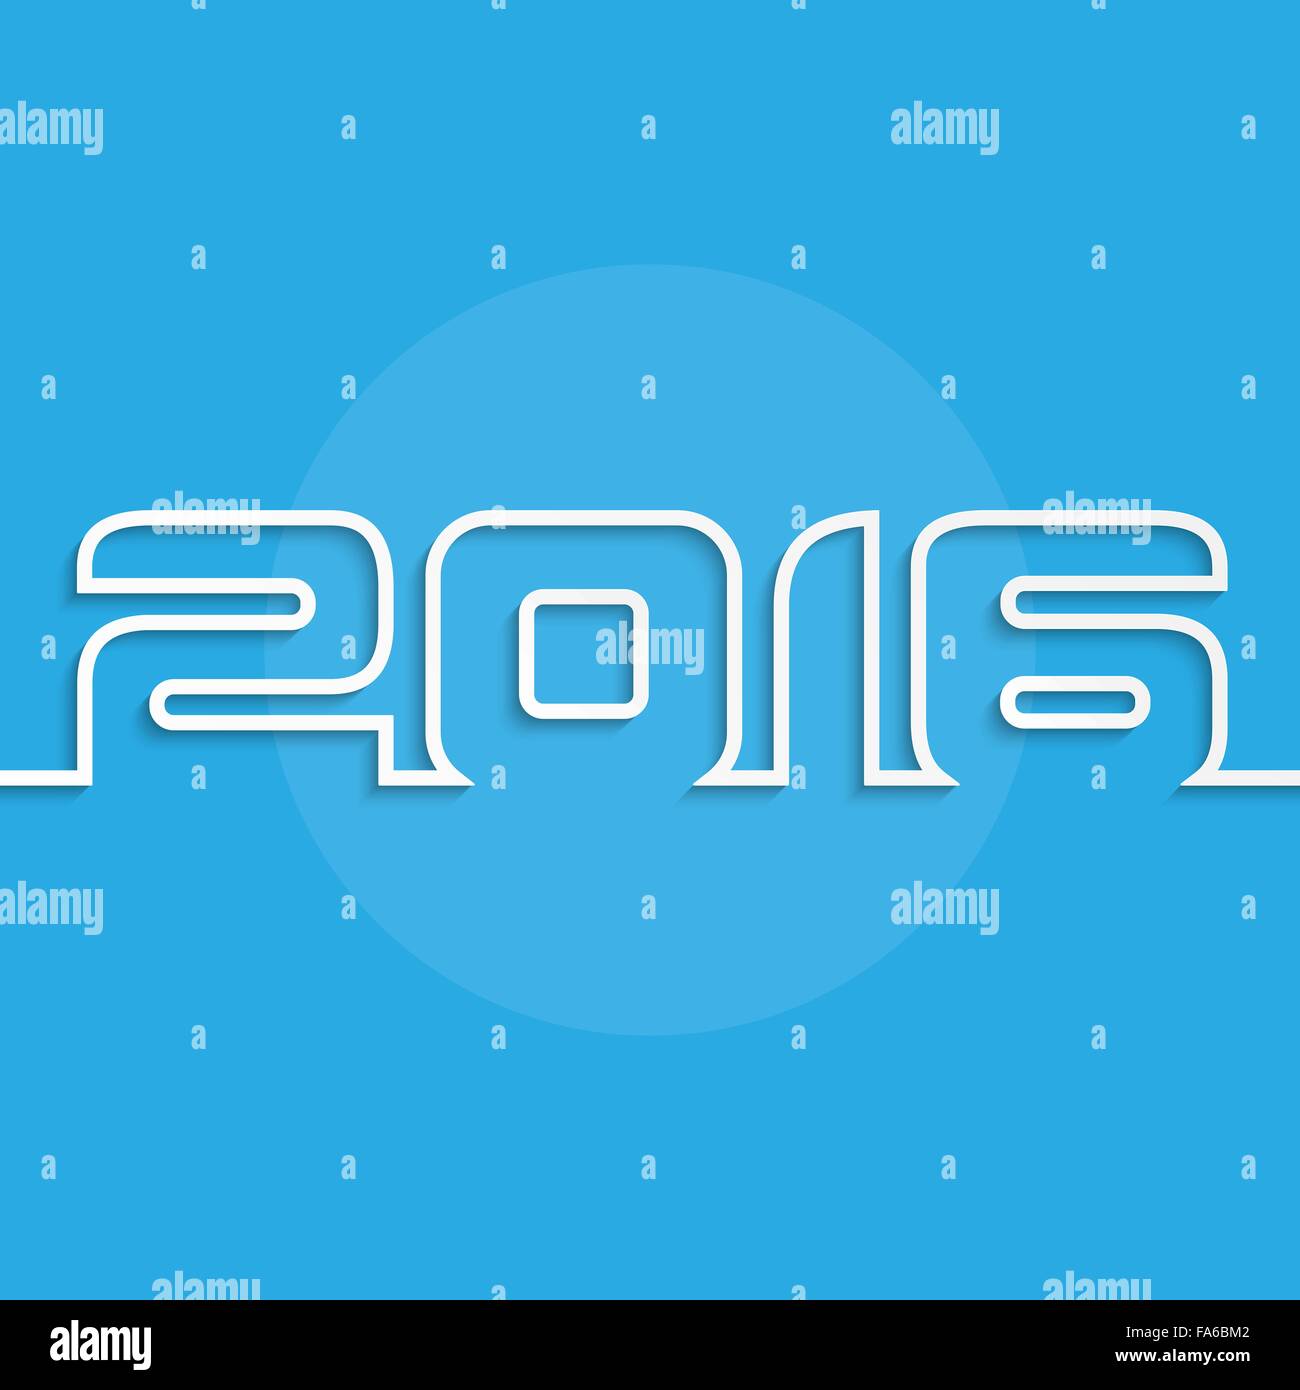 Happy New Year 2016 Greeting Card Design Stock Vector Image And Art Alamy